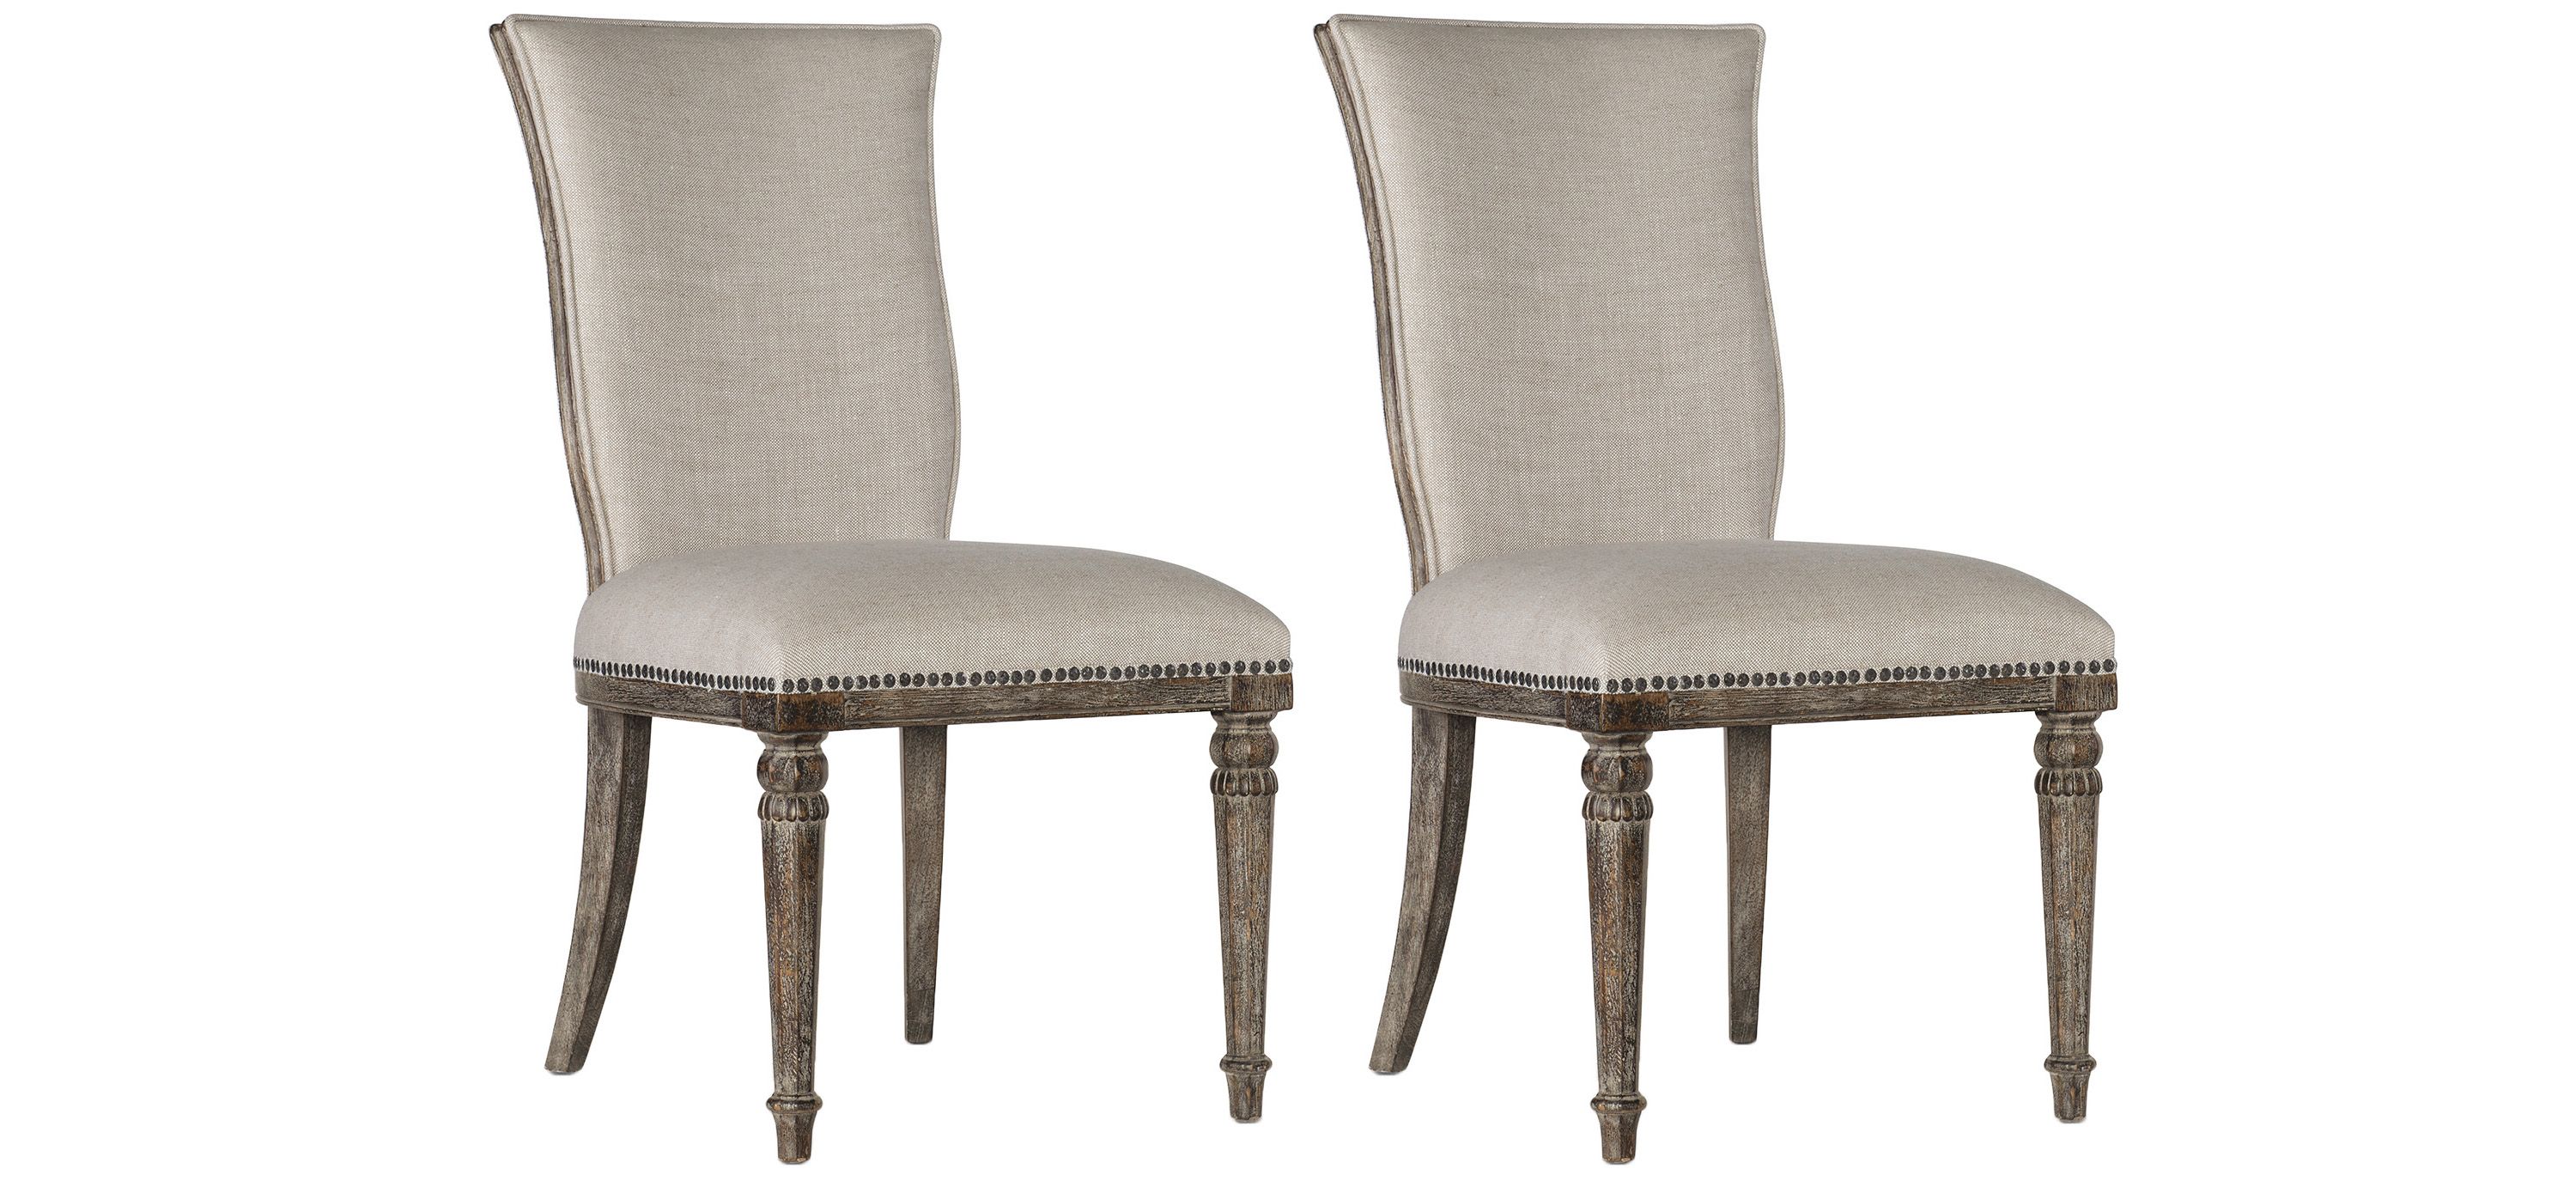 Traditions Upholstered Side Chair-Set of 2